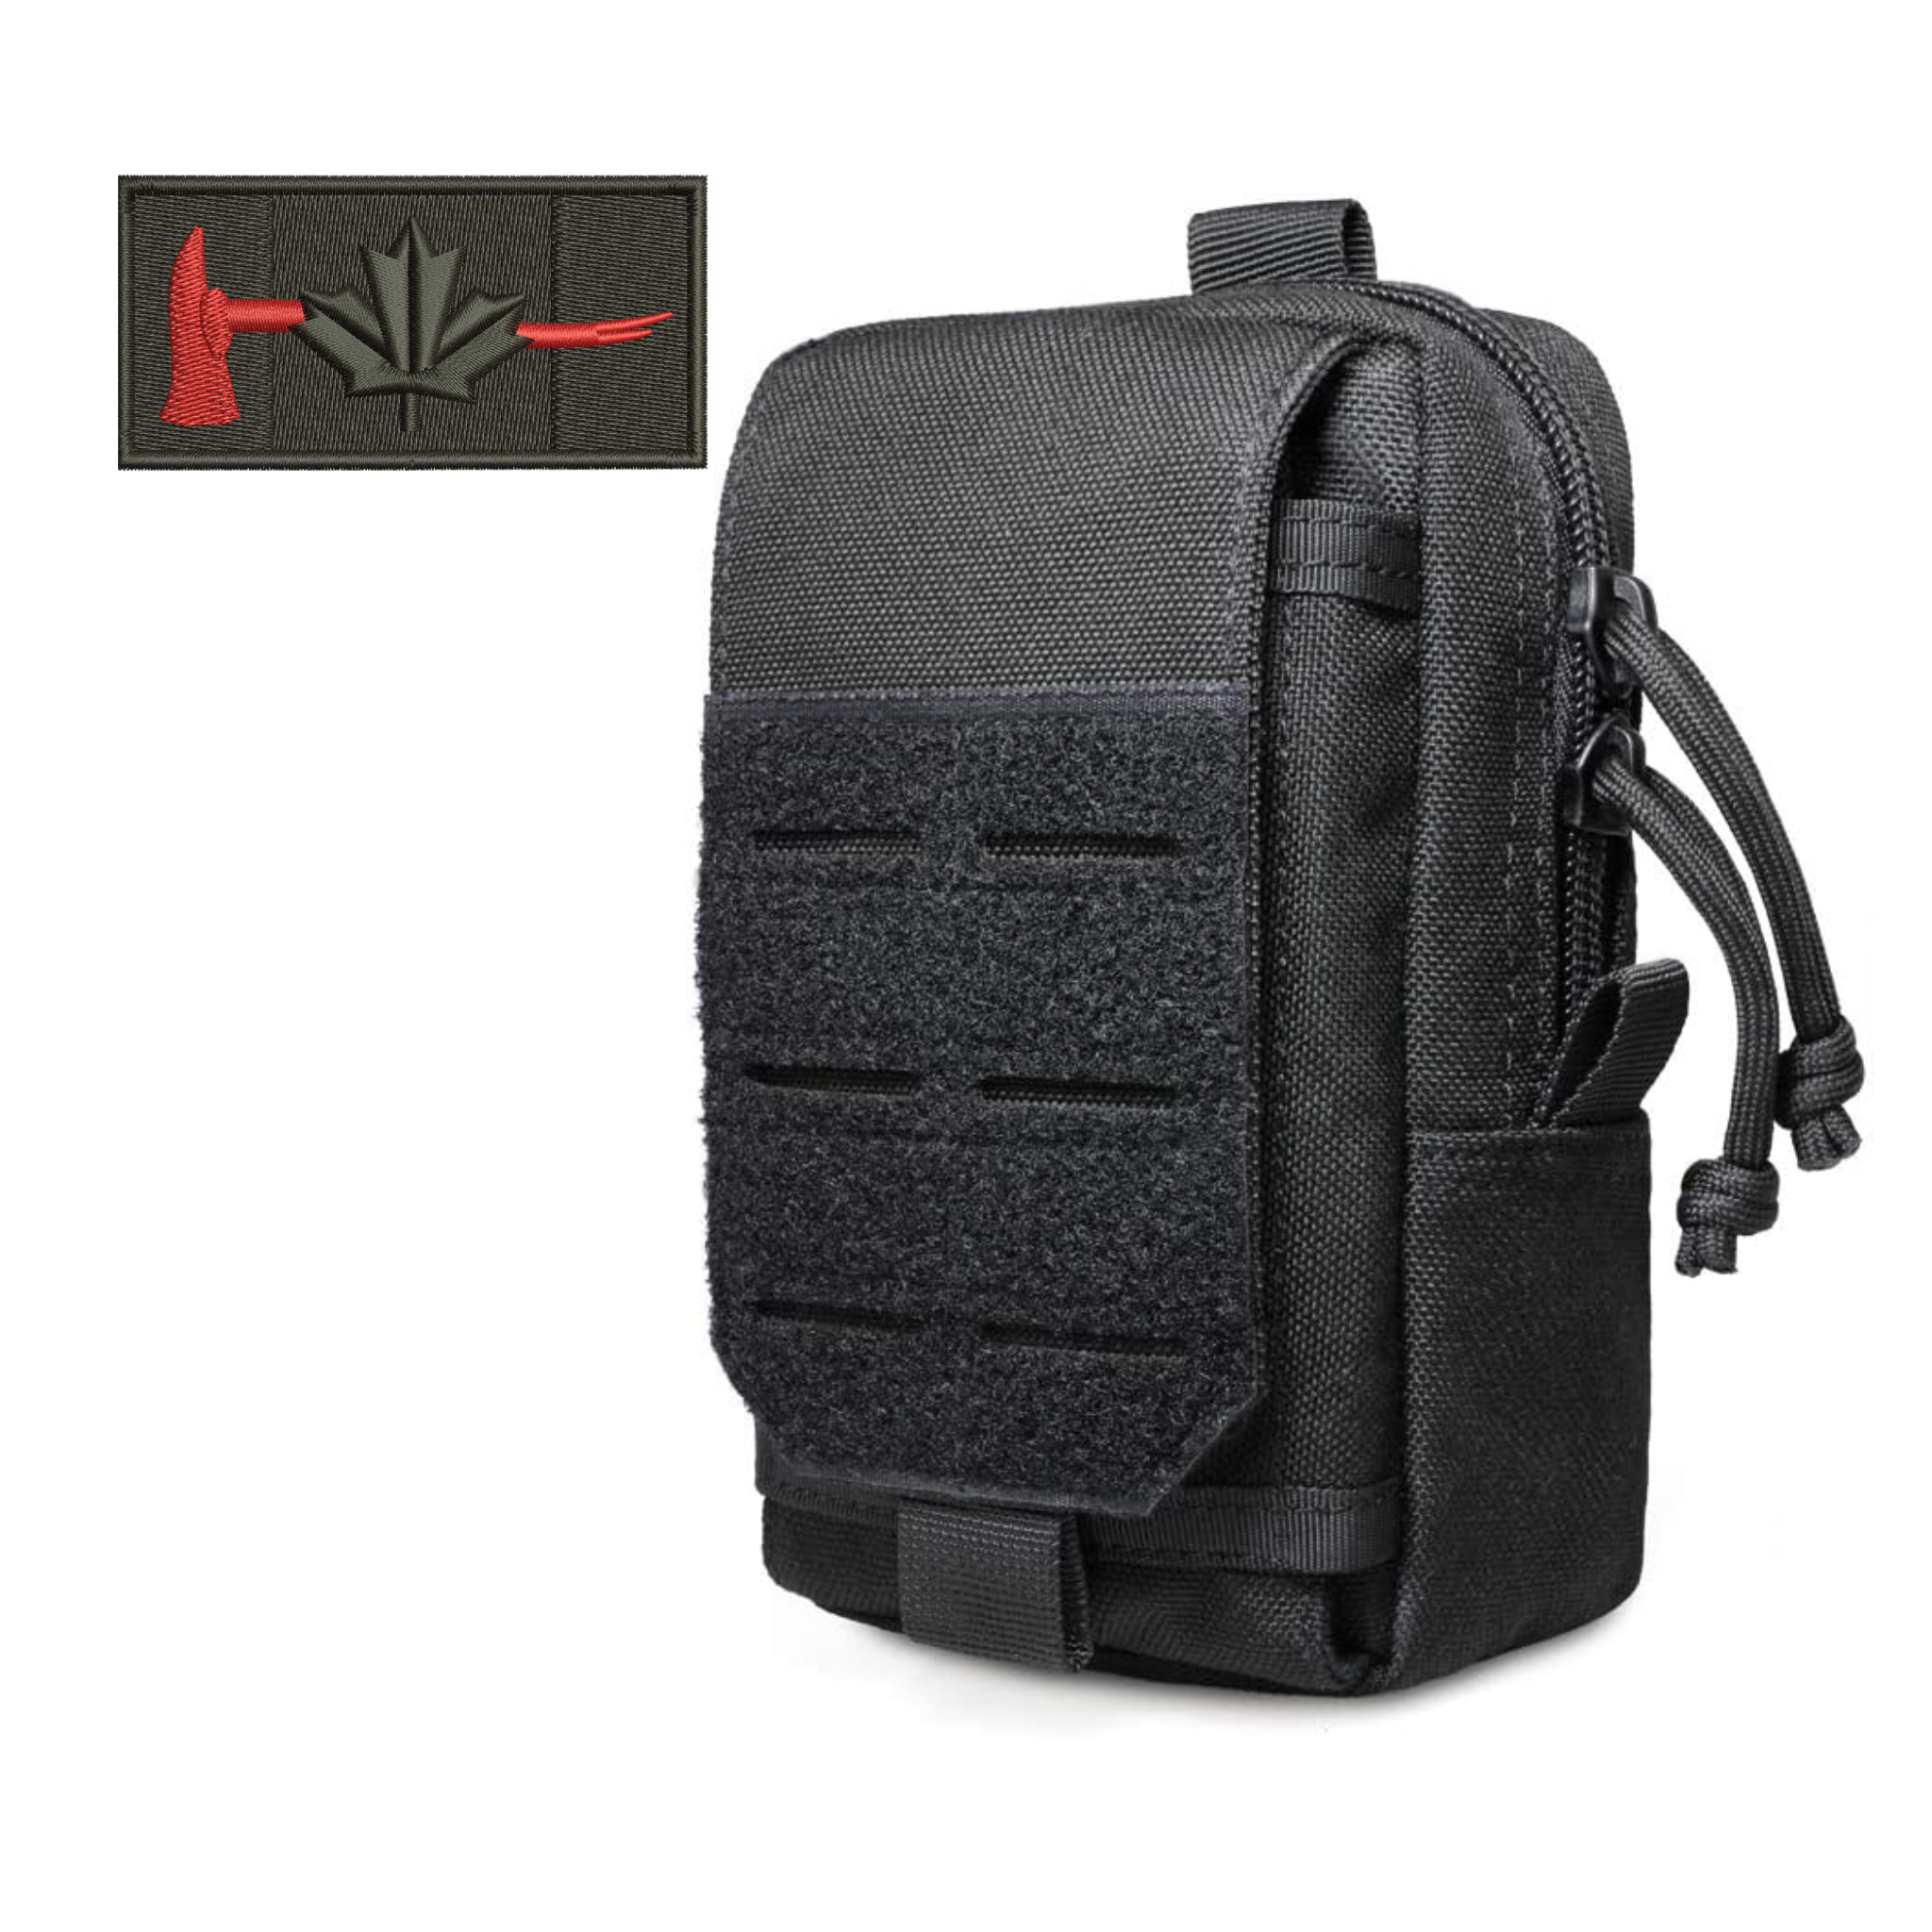 Police Vest Pouch + Free Patch